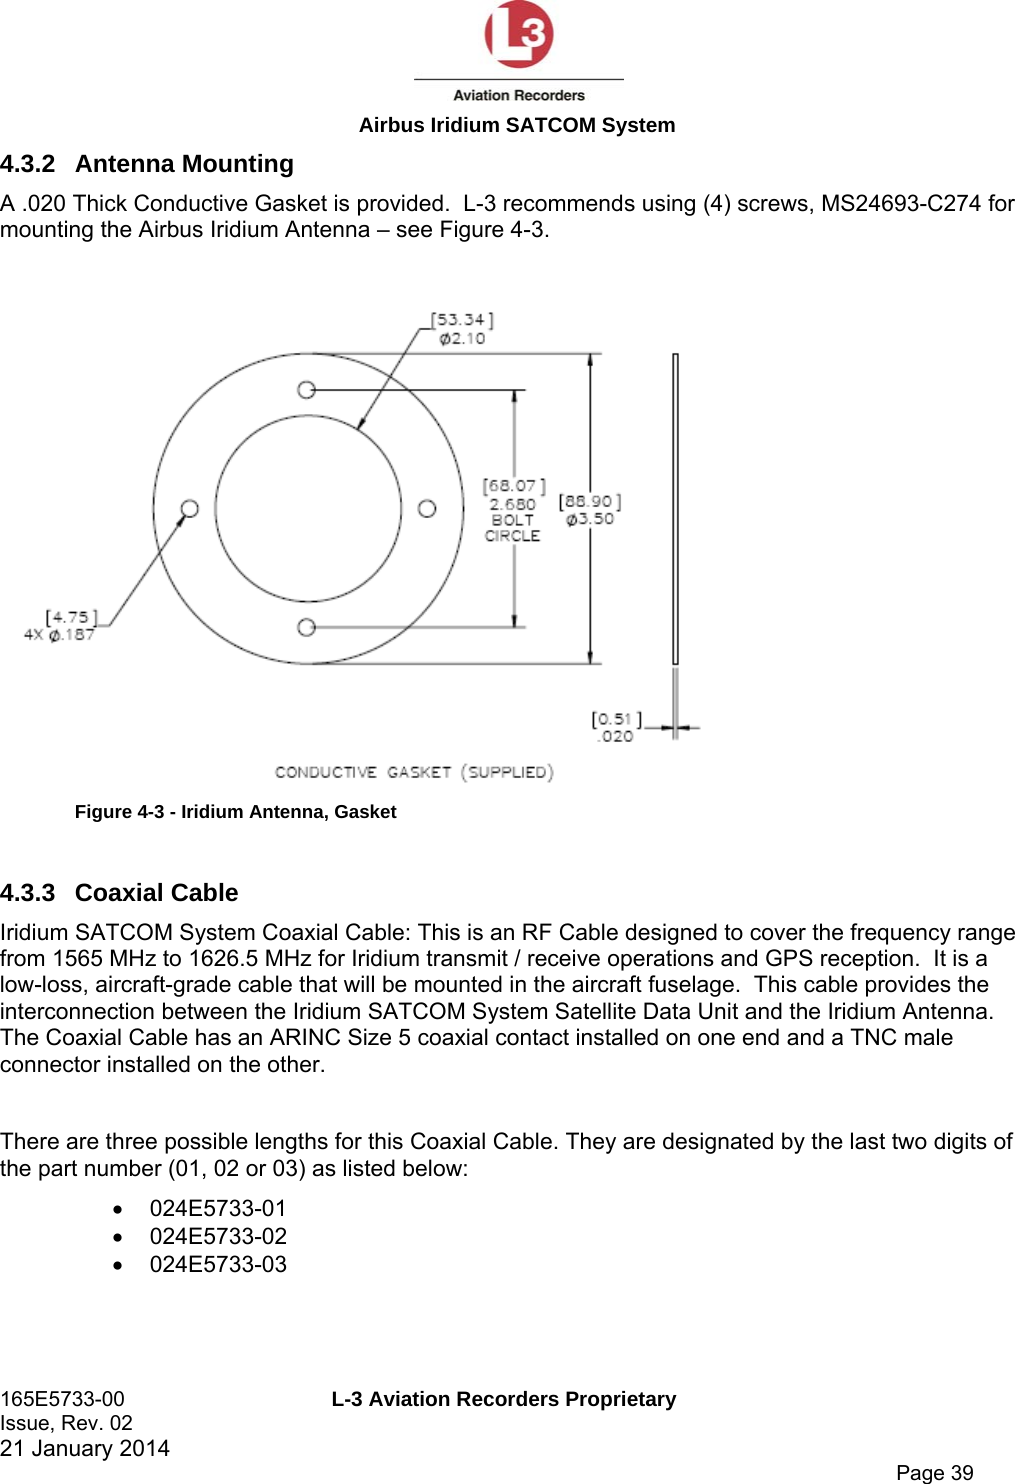  Airbus Iridium SATCOM System 165E5733-00  L-3 Aviation Recorders Proprietary Issue, Rev. 02   21 January 2014      Page 39 4.3.2 Antenna Mounting A .020 Thick Conductive Gasket is provided.  L-3 recommends using (4) screws, MS24693-C274 for mounting the Airbus Iridium Antenna – see Figure 4-3.   Figure 4-3 - Iridium Antenna, Gasket  4.3.3 Coaxial Cable Iridium SATCOM System Coaxial Cable: This is an RF Cable designed to cover the frequency range from 1565 MHz to 1626.5 MHz for Iridium transmit / receive operations and GPS reception.  It is a low-loss, aircraft-grade cable that will be mounted in the aircraft fuselage.  This cable provides the interconnection between the Iridium SATCOM System Satellite Data Unit and the Iridium Antenna. The Coaxial Cable has an ARINC Size 5 coaxial contact installed on one end and a TNC male connector installed on the other.   There are three possible lengths for this Coaxial Cable. They are designated by the last two digits of the part number (01, 02 or 03) as listed below:  024E5733-01  024E5733-02  024E5733-03   